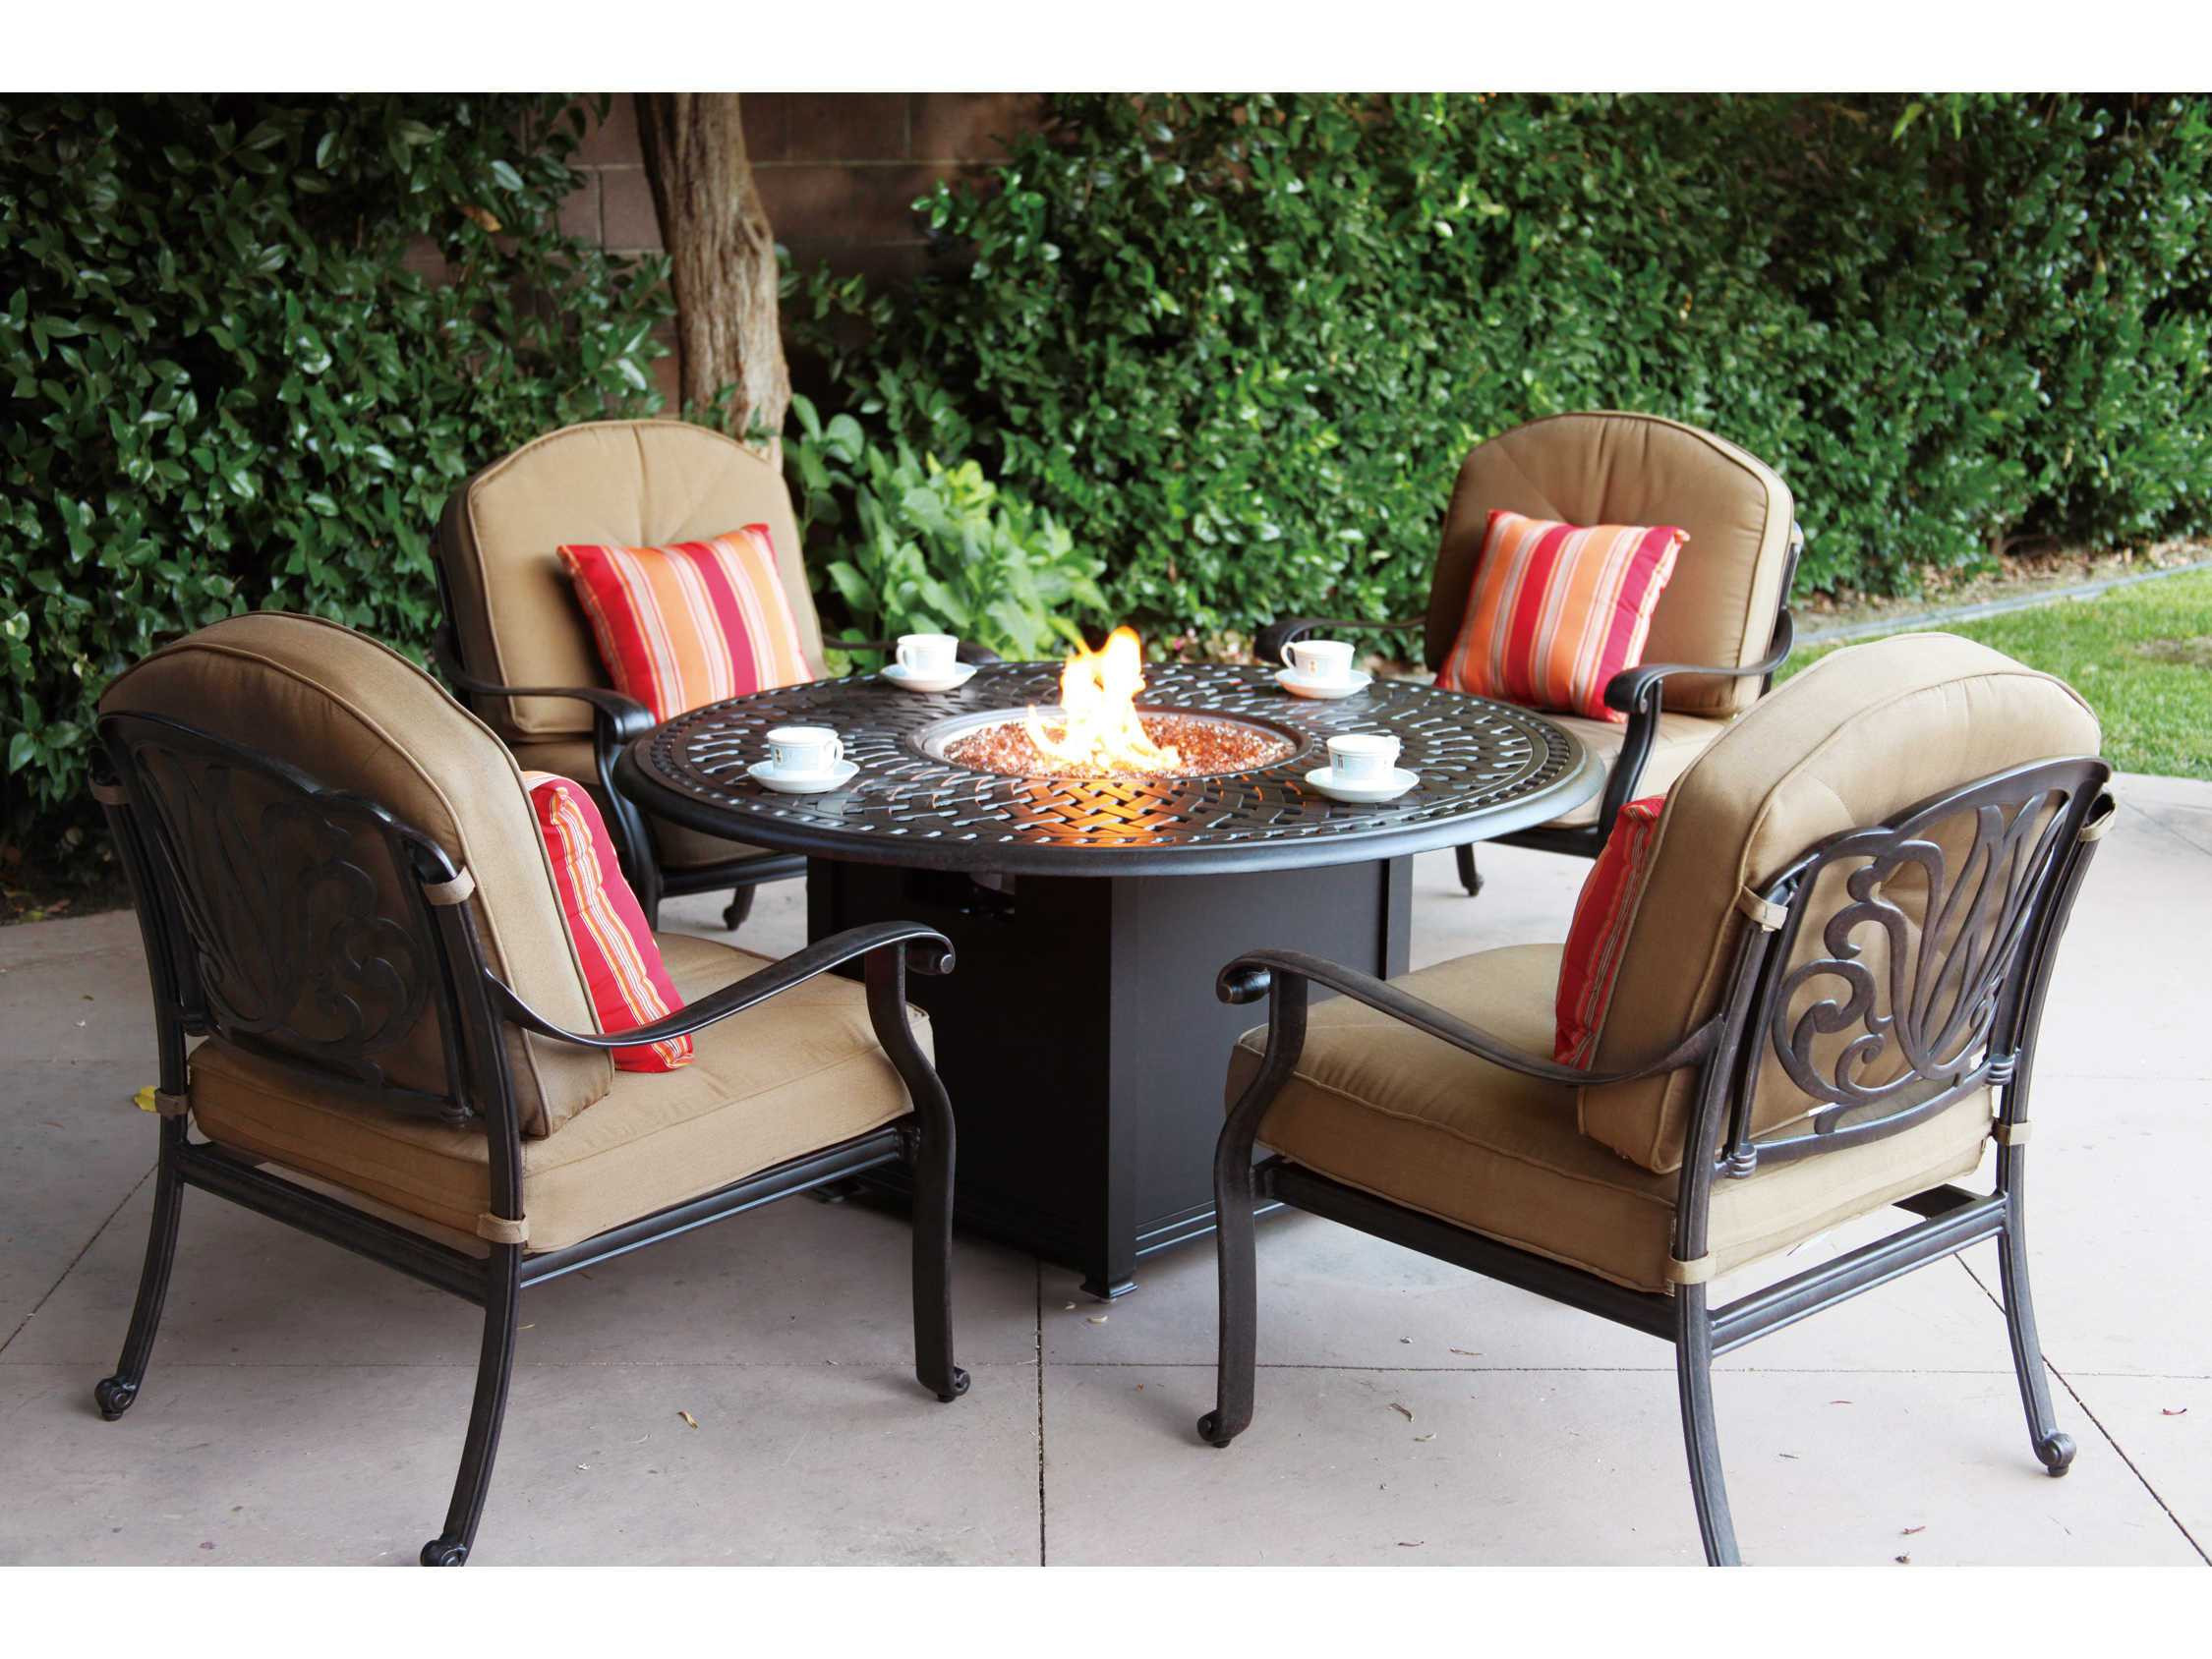 Fire Pit Dining Table
 Darlee Outdoor Living Series 60 Cast Aluminum 60 Round